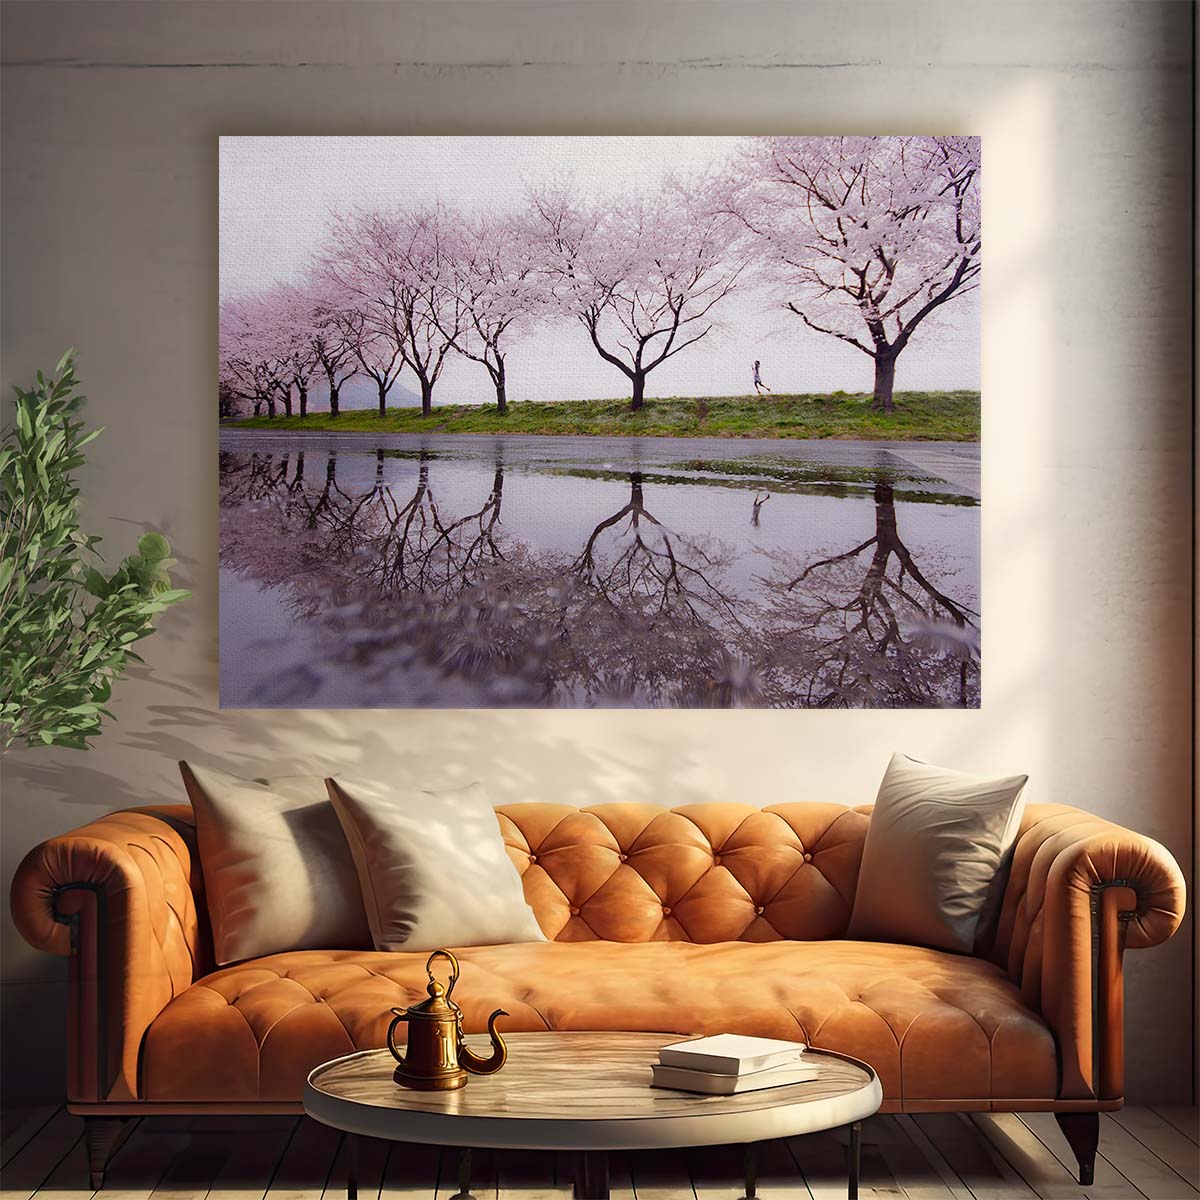 Sakura Blossom Reflections Japan Spring Park Wall Art by Luxuriance Designs. Made in USA.